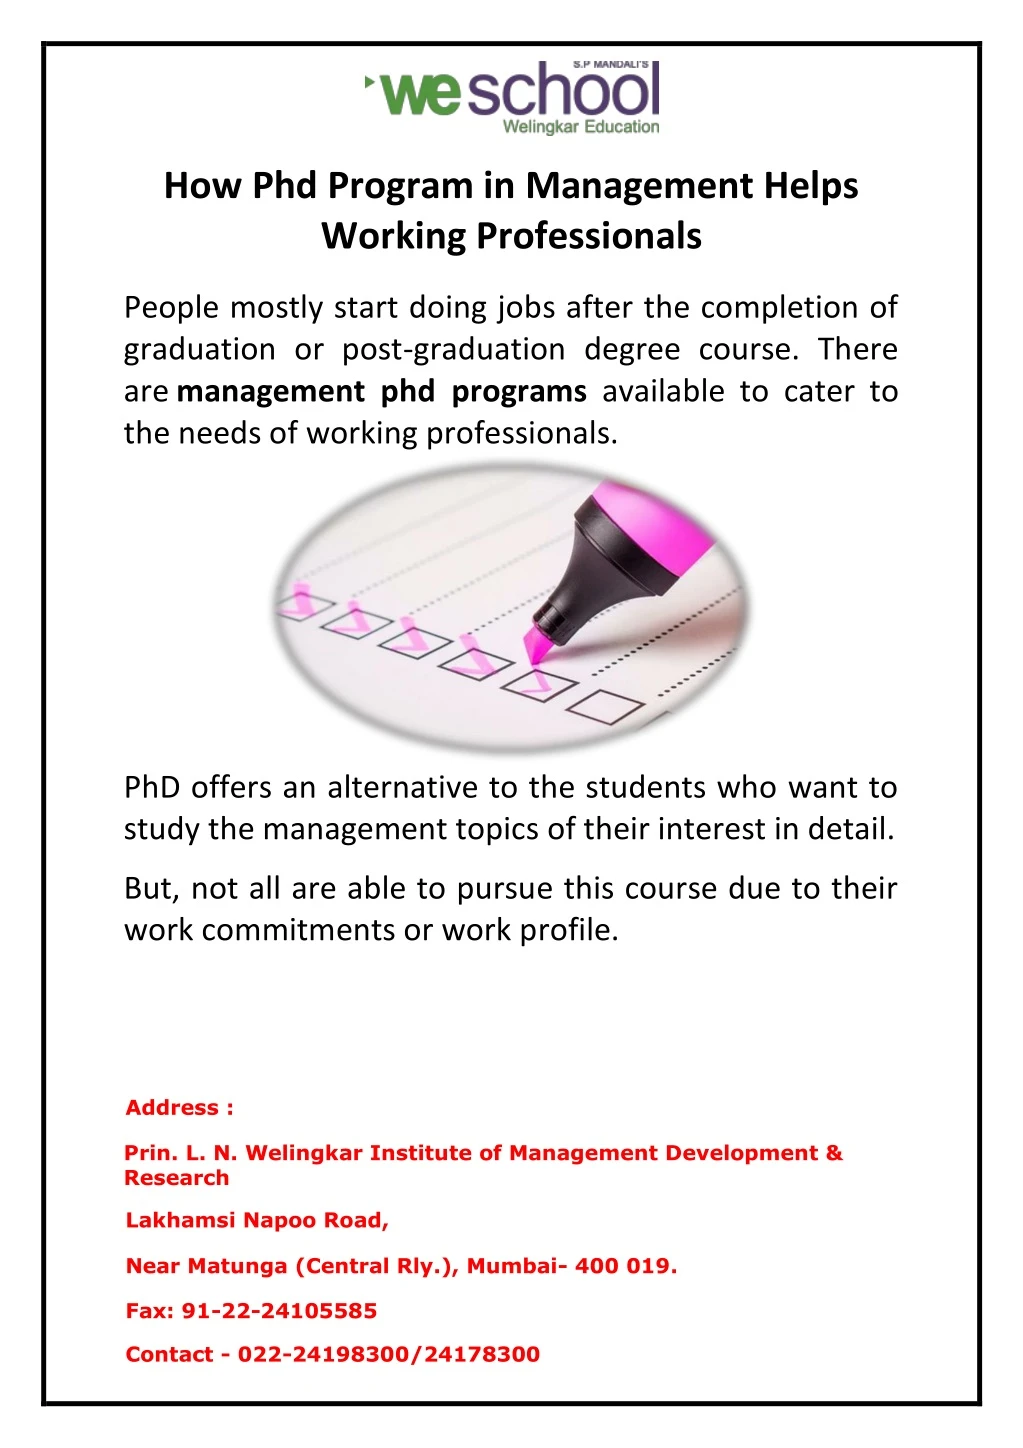 how phd program in management helps working